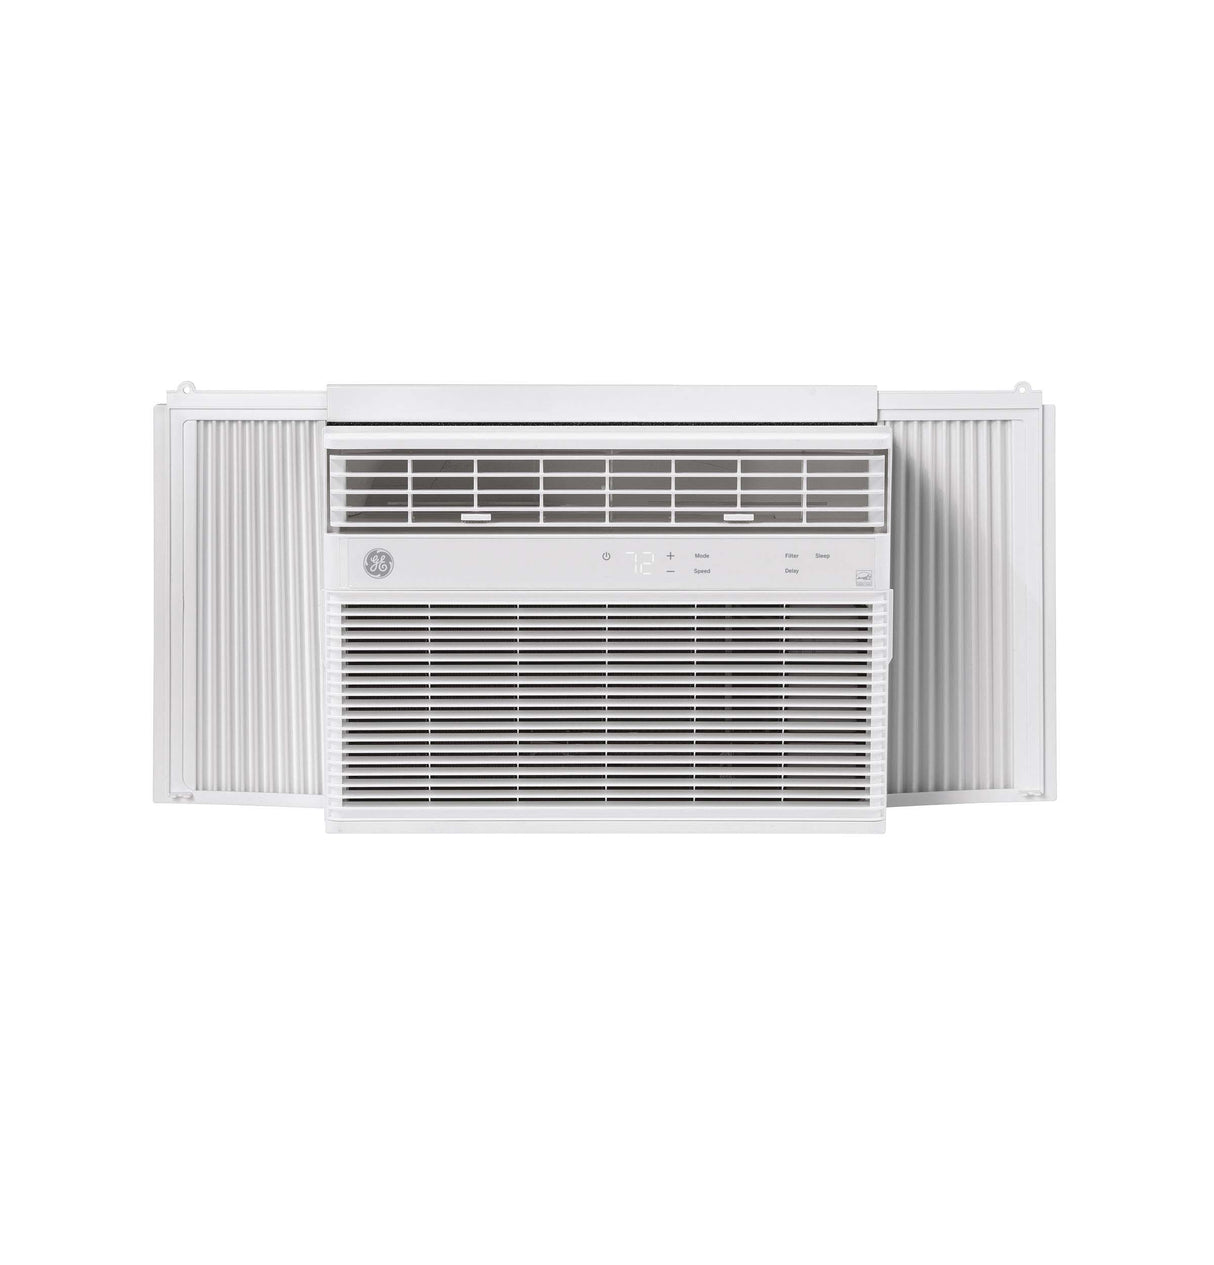 GE(R) 12,000 BTU Heat/Cool Electronic Window Air Conditioner for Large Rooms up to 550 sq. ft. - (AHE12DZ)